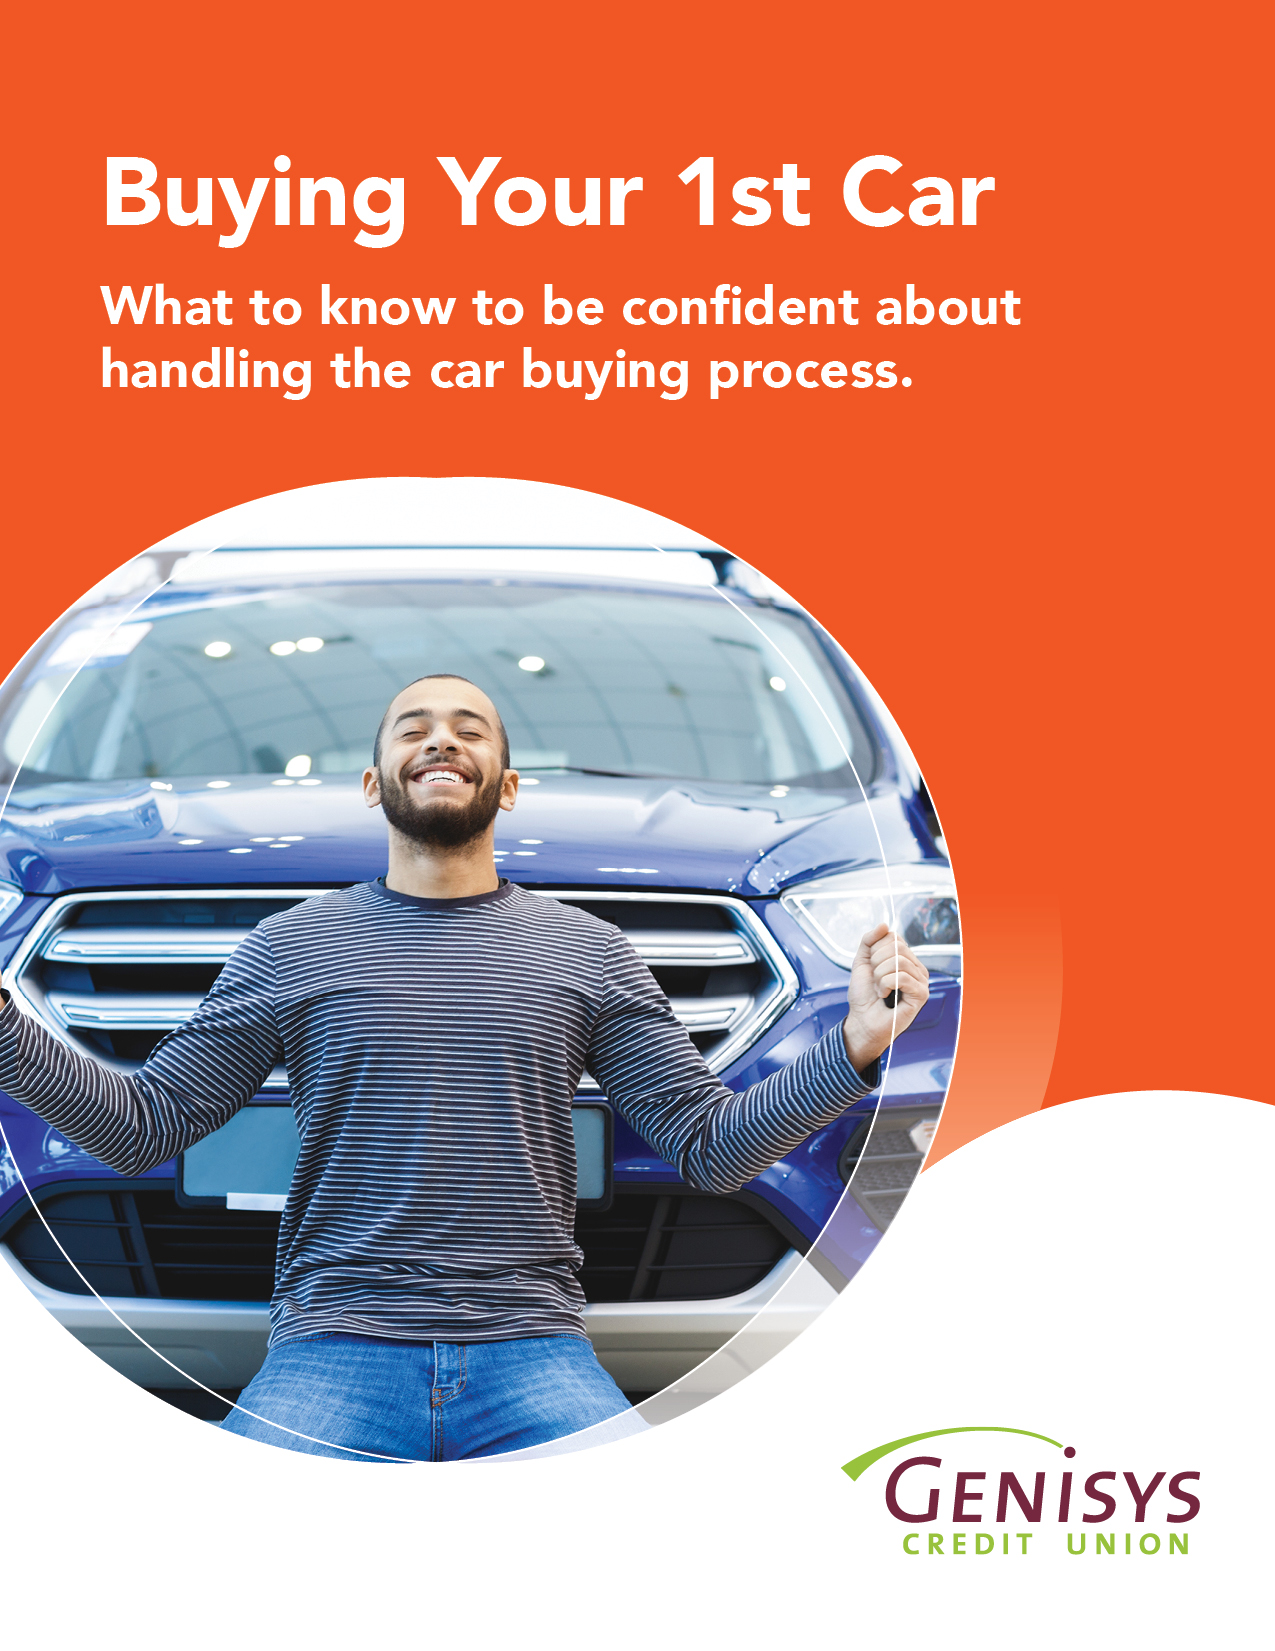 Buying Your First Car eBook cover graphic